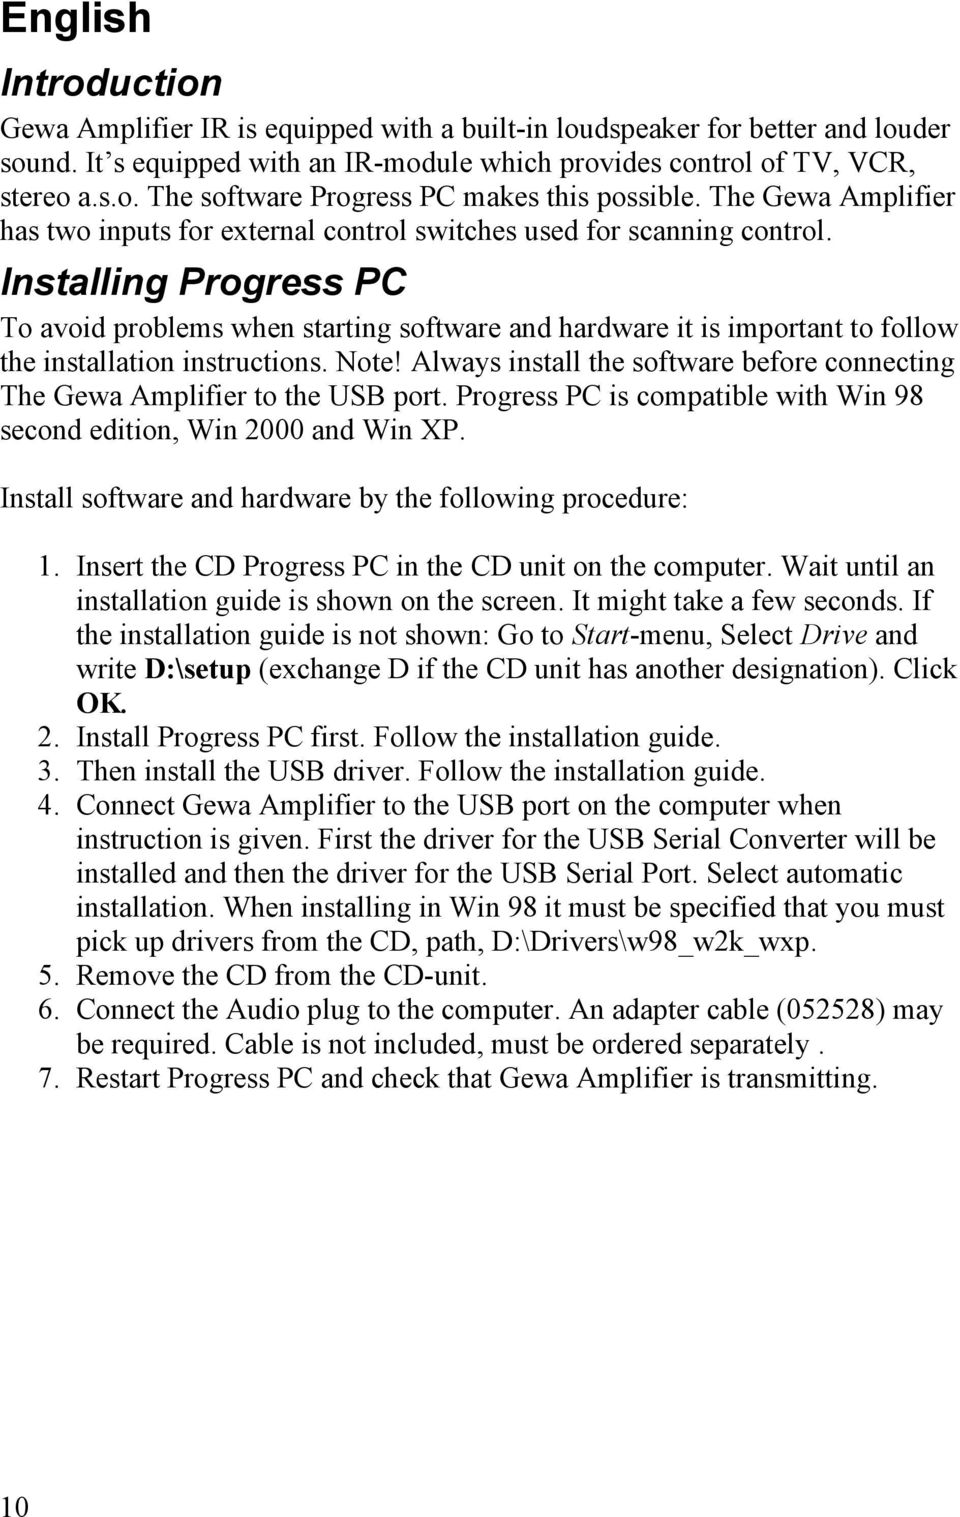 Installing Progress PC To avoid problems when starting software and hardware it is important to follow the installation instructions. Note!